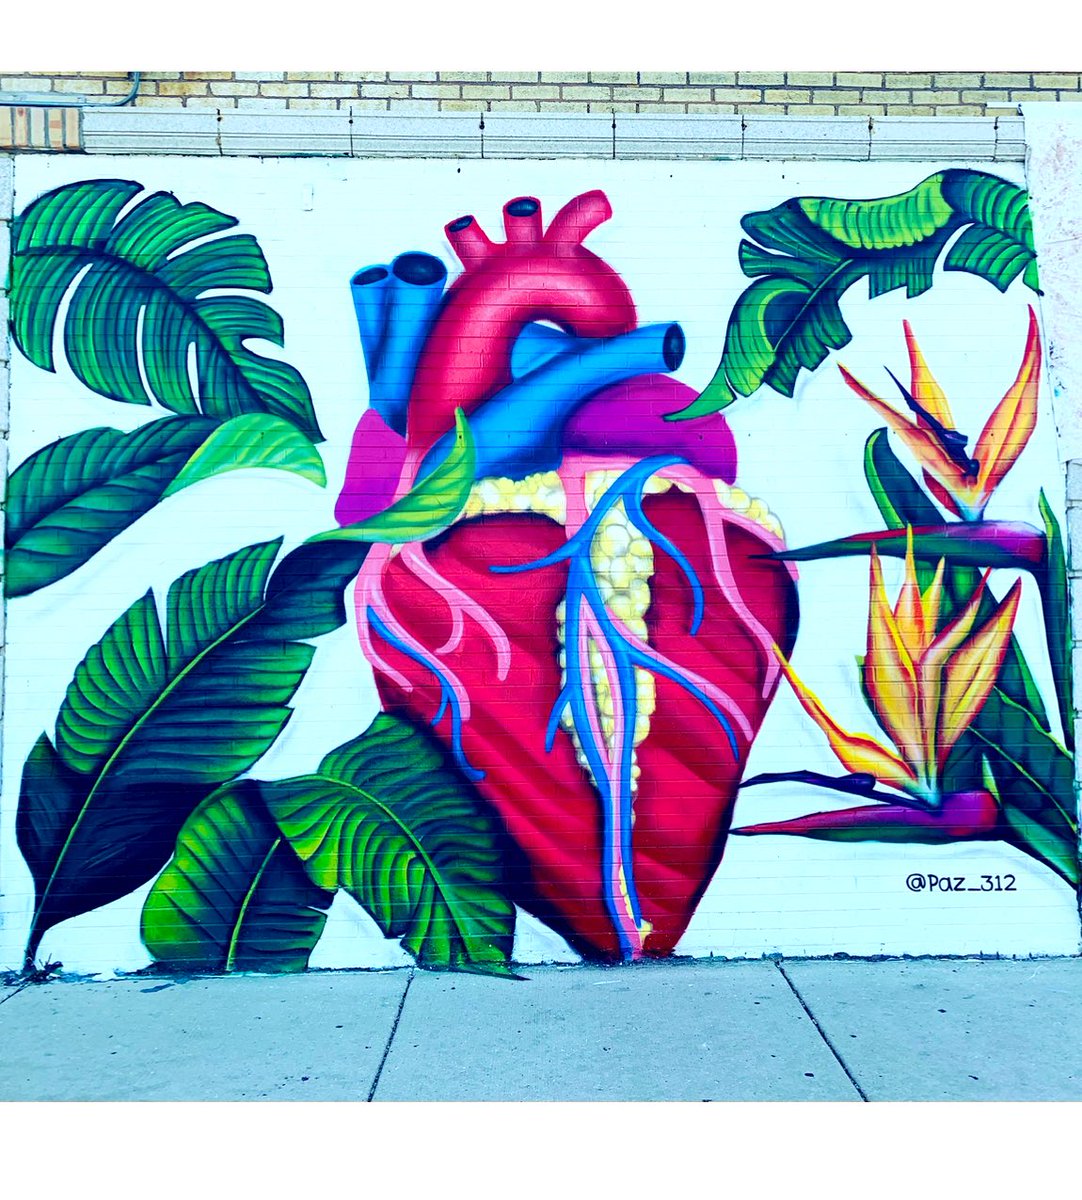 Happy ♥️ Day #LoganSquare 

(🖌️ by @paz_312)